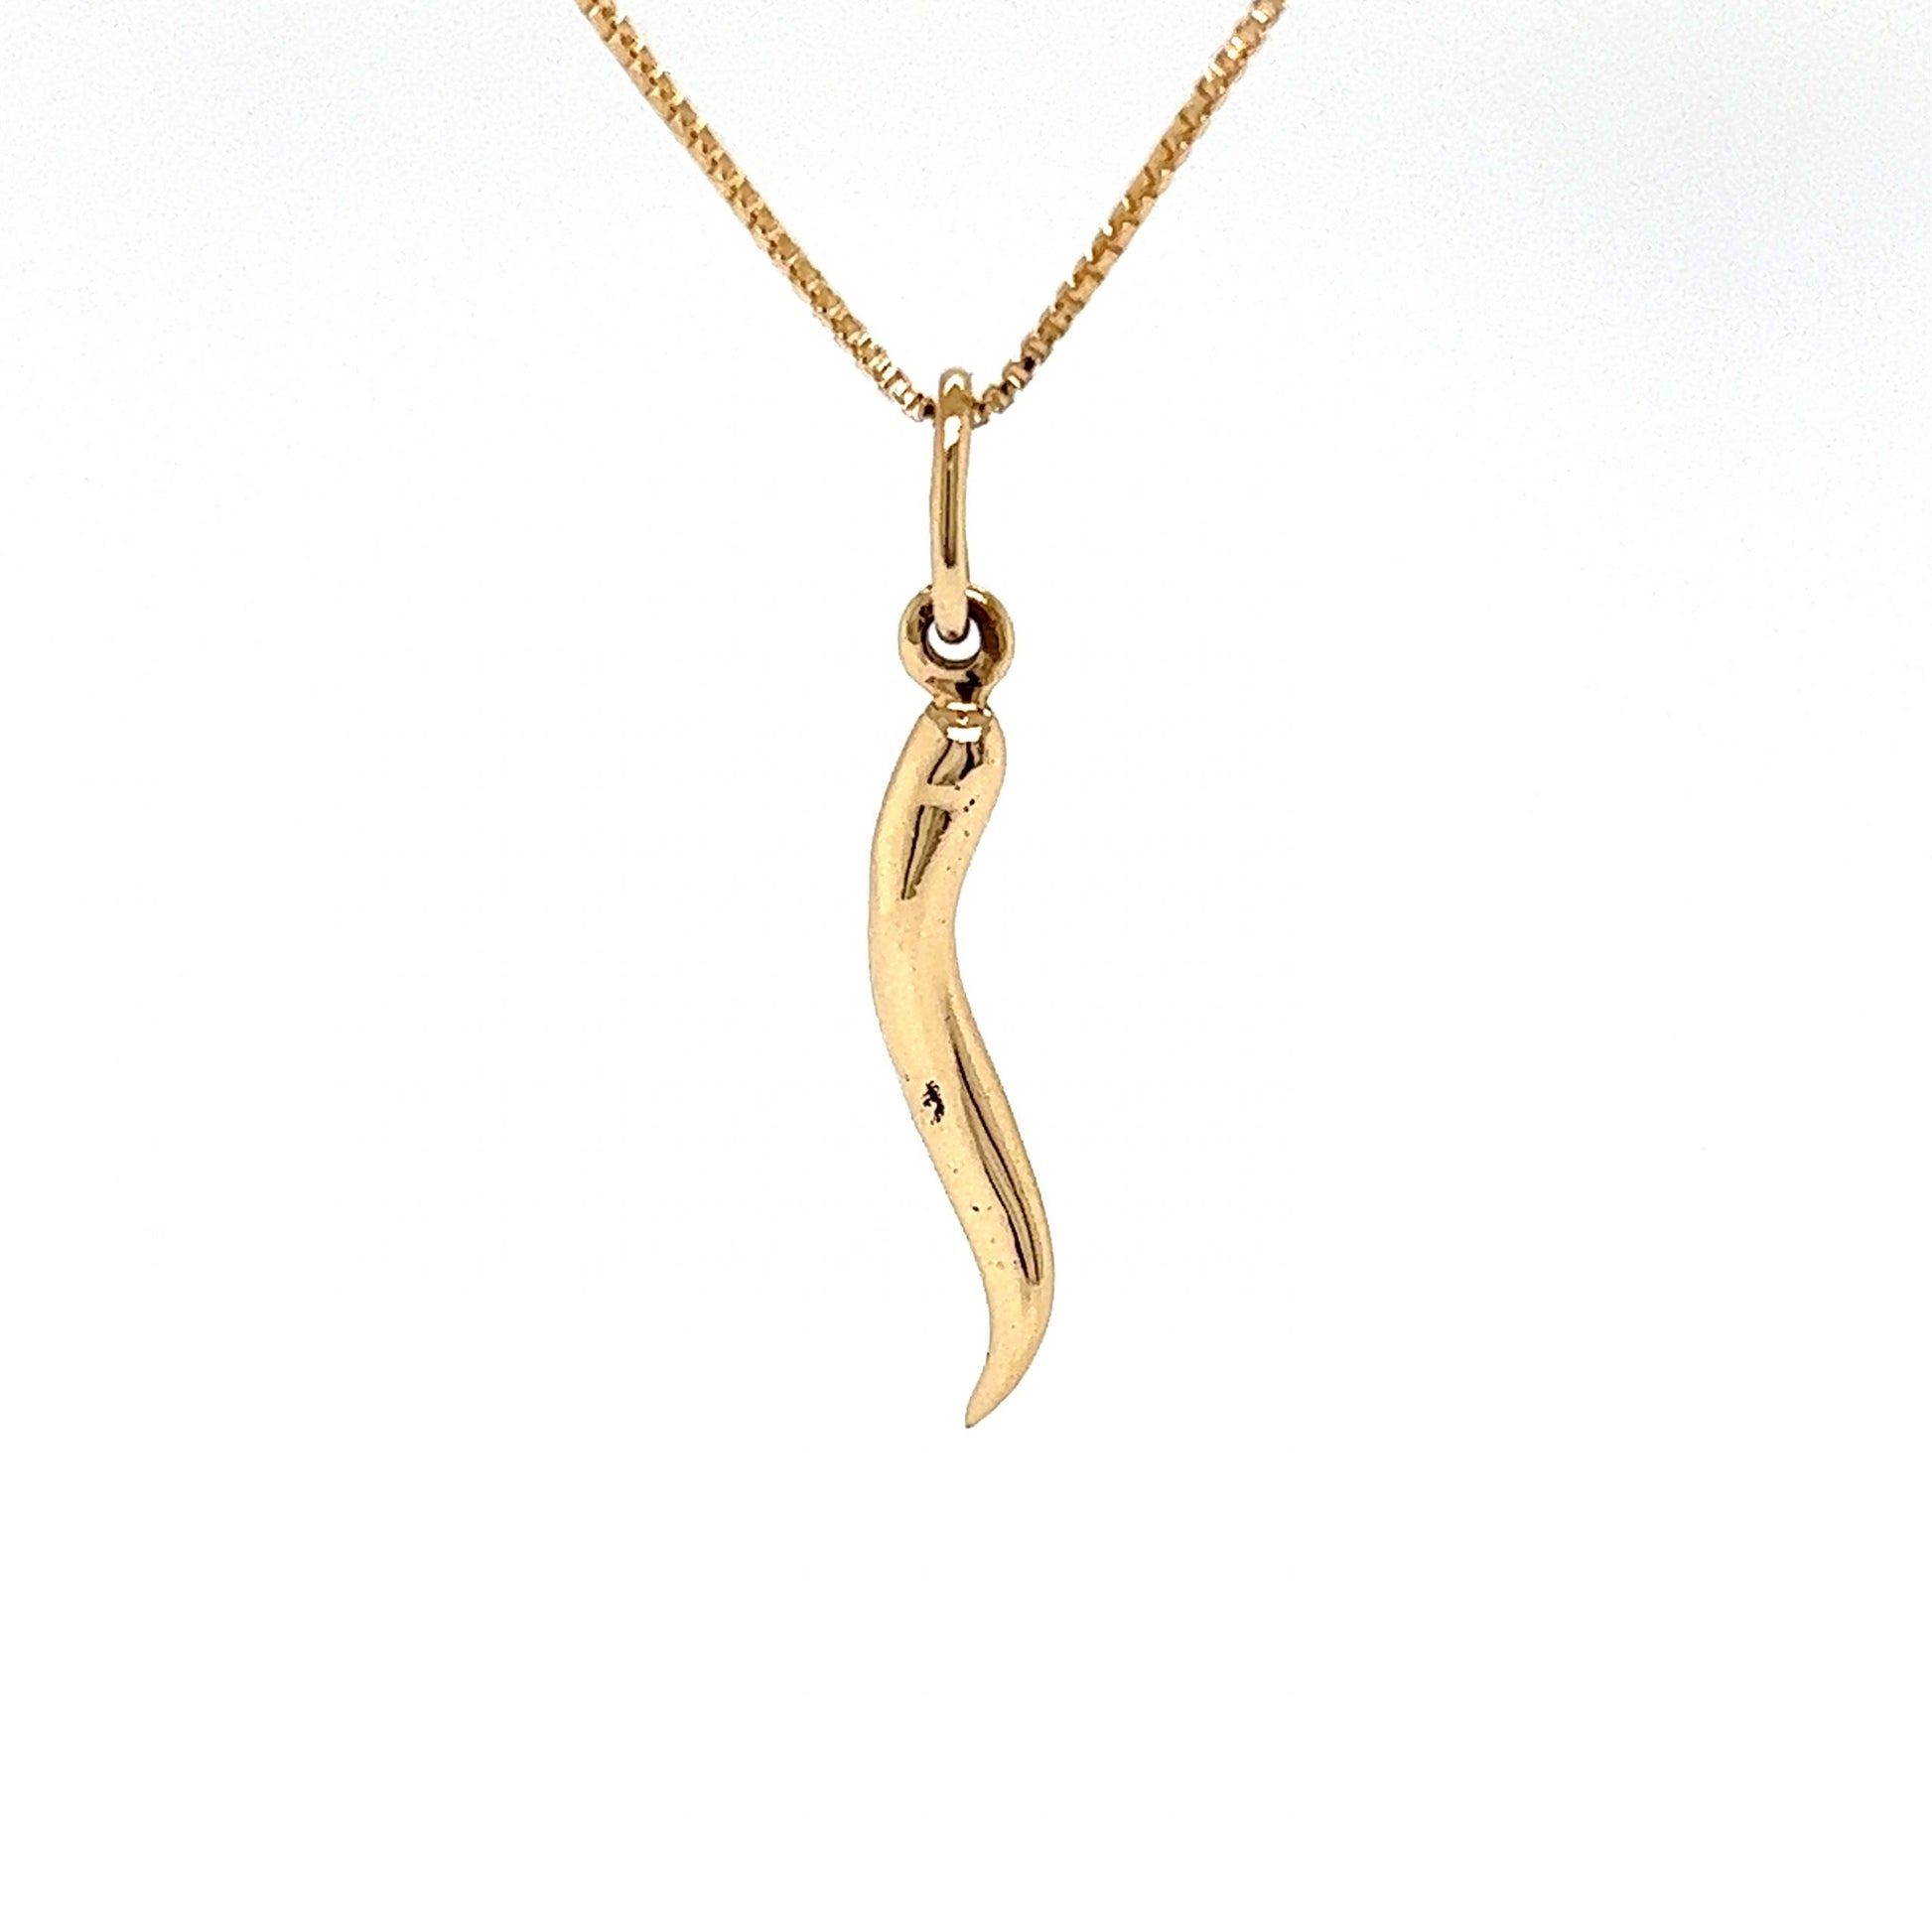 Lucky Cornicello Pendant Necklace in 14k Yellow GoldComposition: 14 Karat Yellow GoldTotal Gram Weight: 4.2 gInscription: 14k 